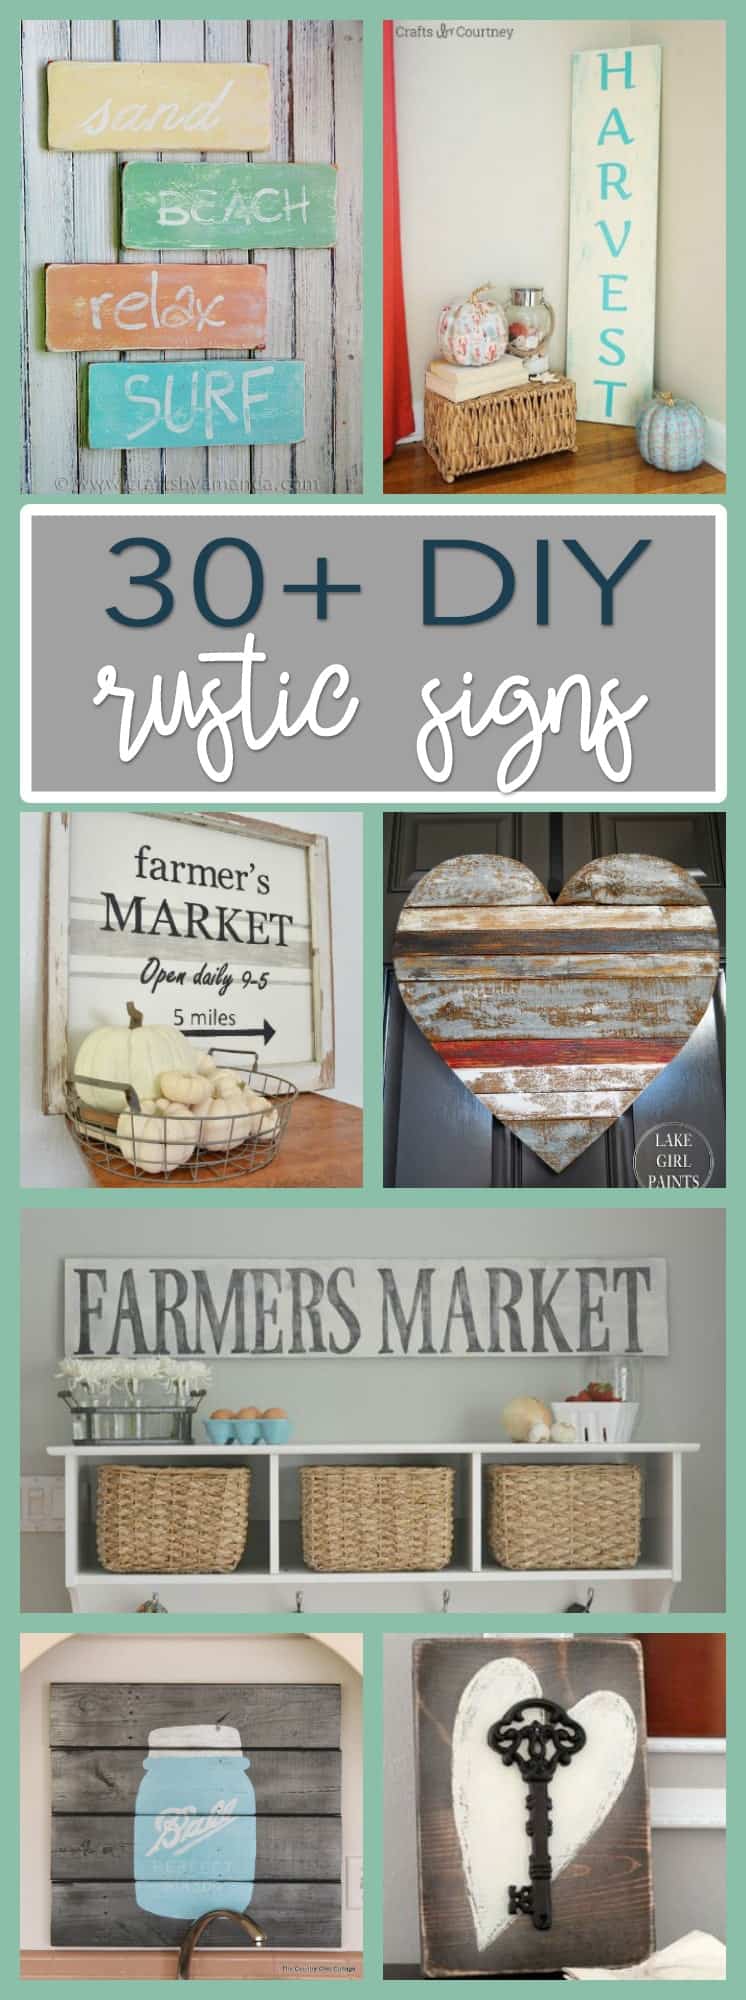 Here we've compiled a round-up of 30+ DIY rustic sign projects to get you inspired to bring rustic charm into your own home!